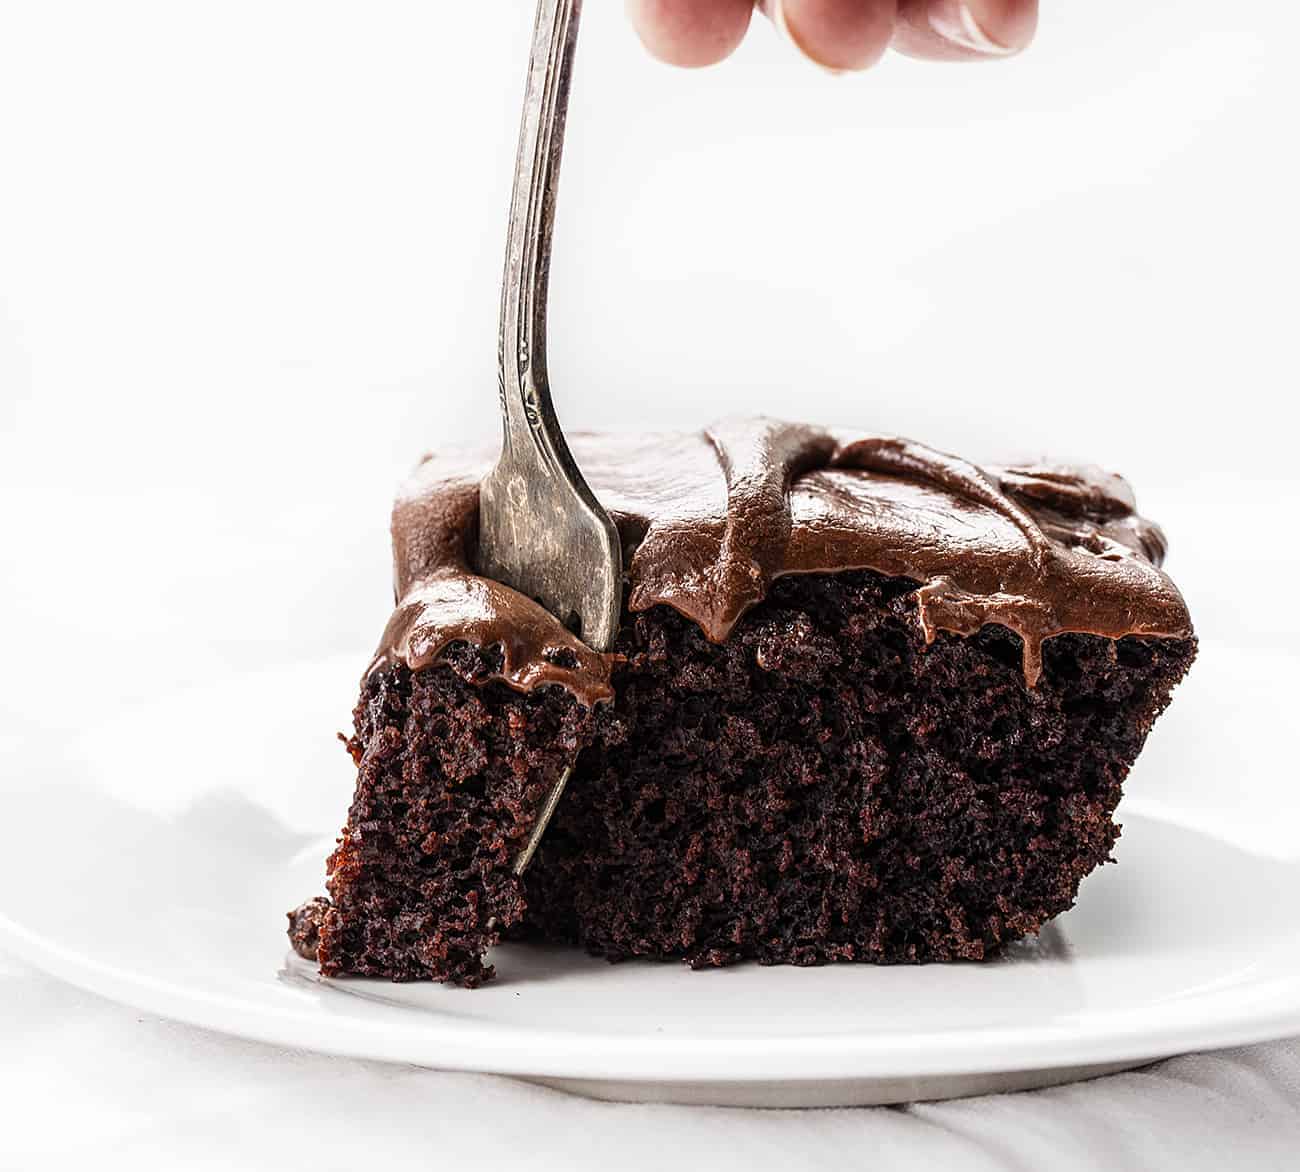 Fork Taking Bite out of Chocolate Depression Cake - Wacky Cake